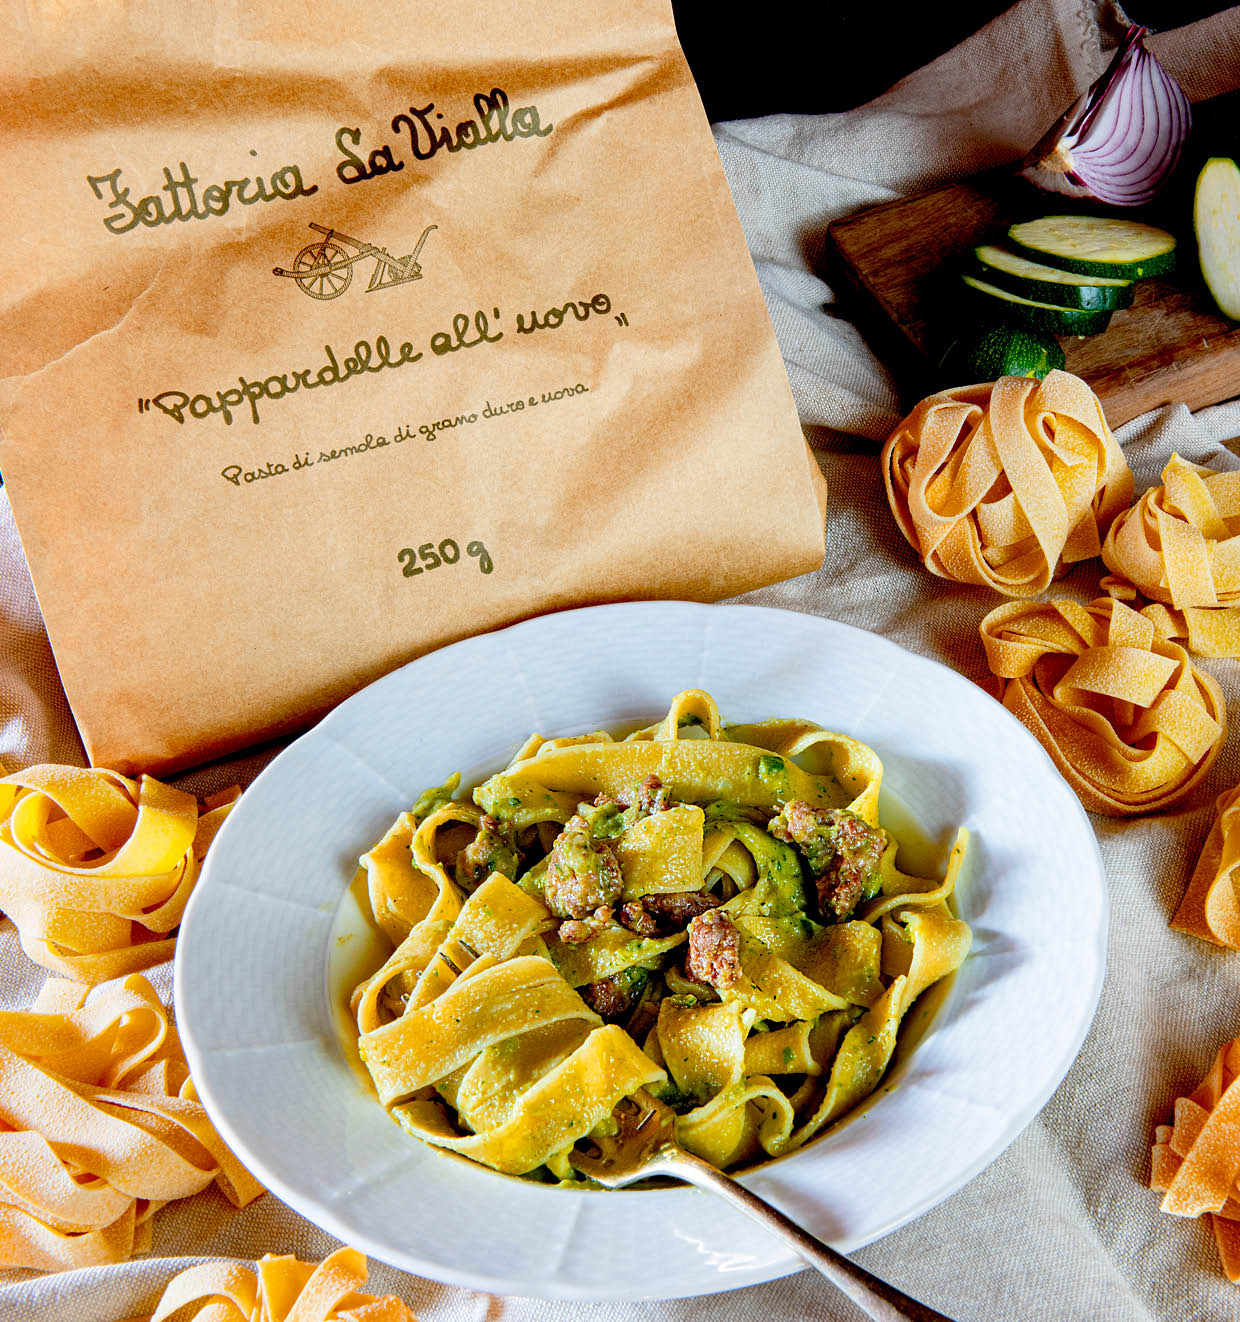 Pappardelle all' uovo